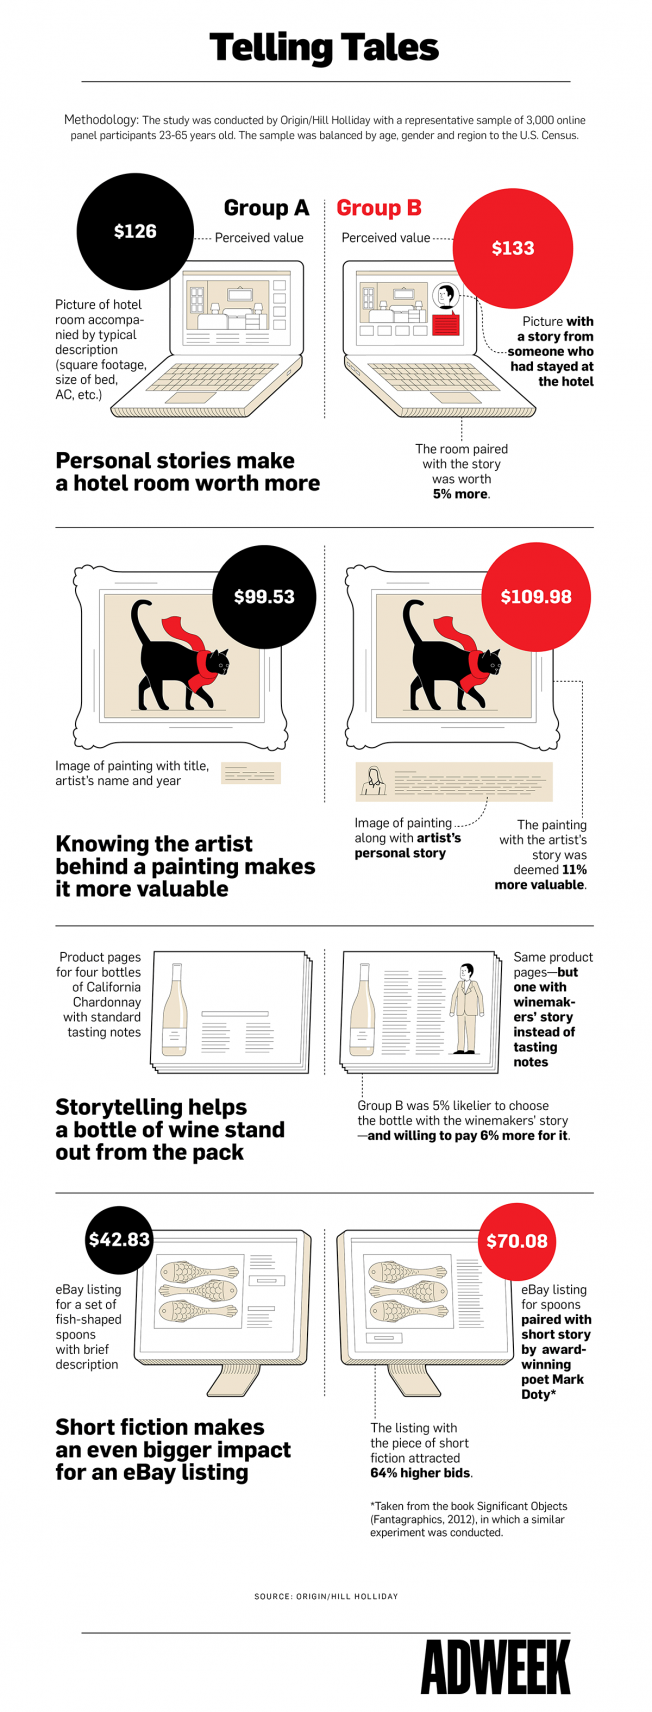 hill holiday storytelling infographic